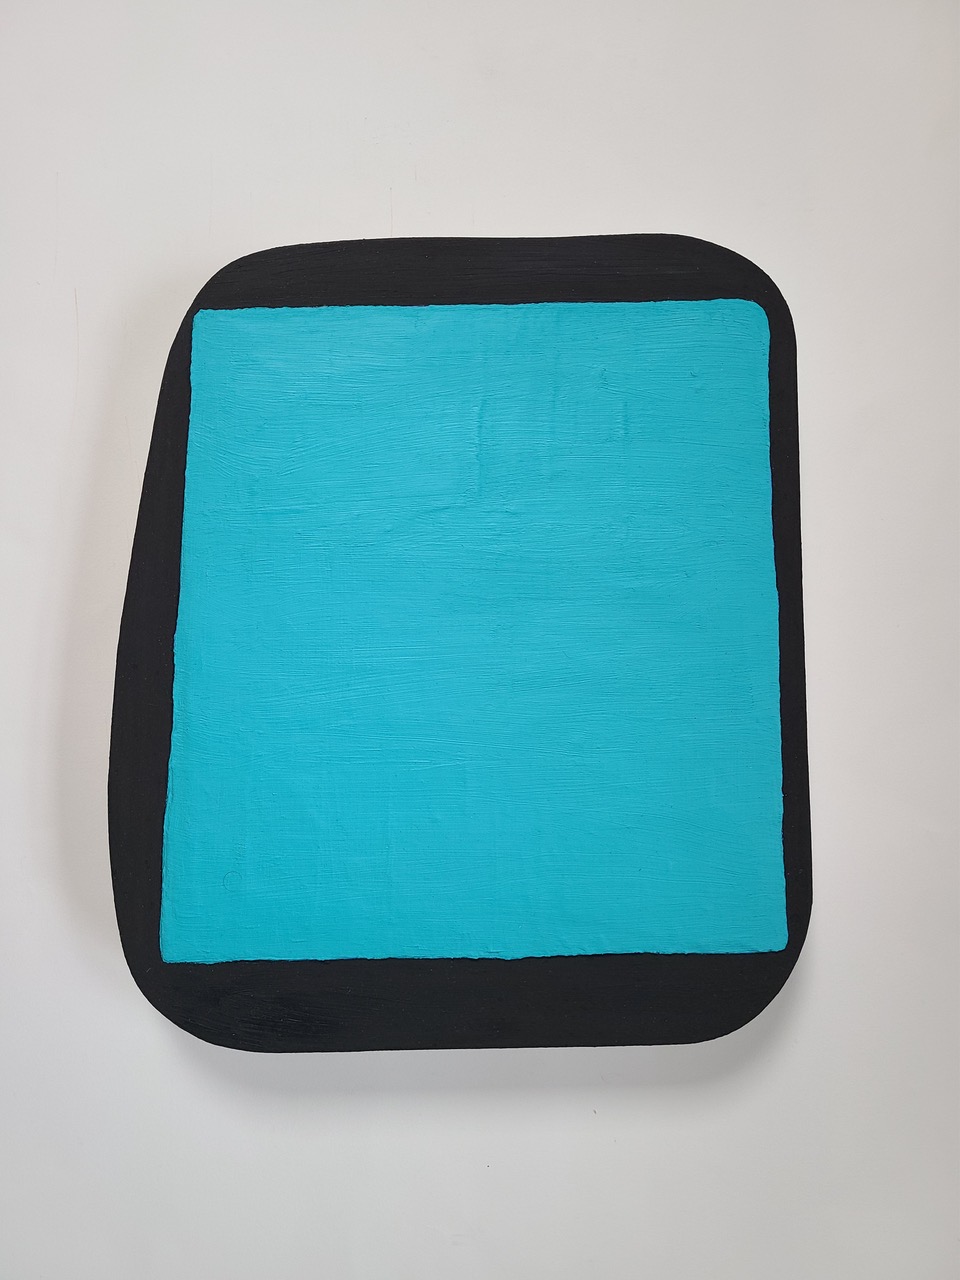 SCHELL - Closer (Teal and Black)